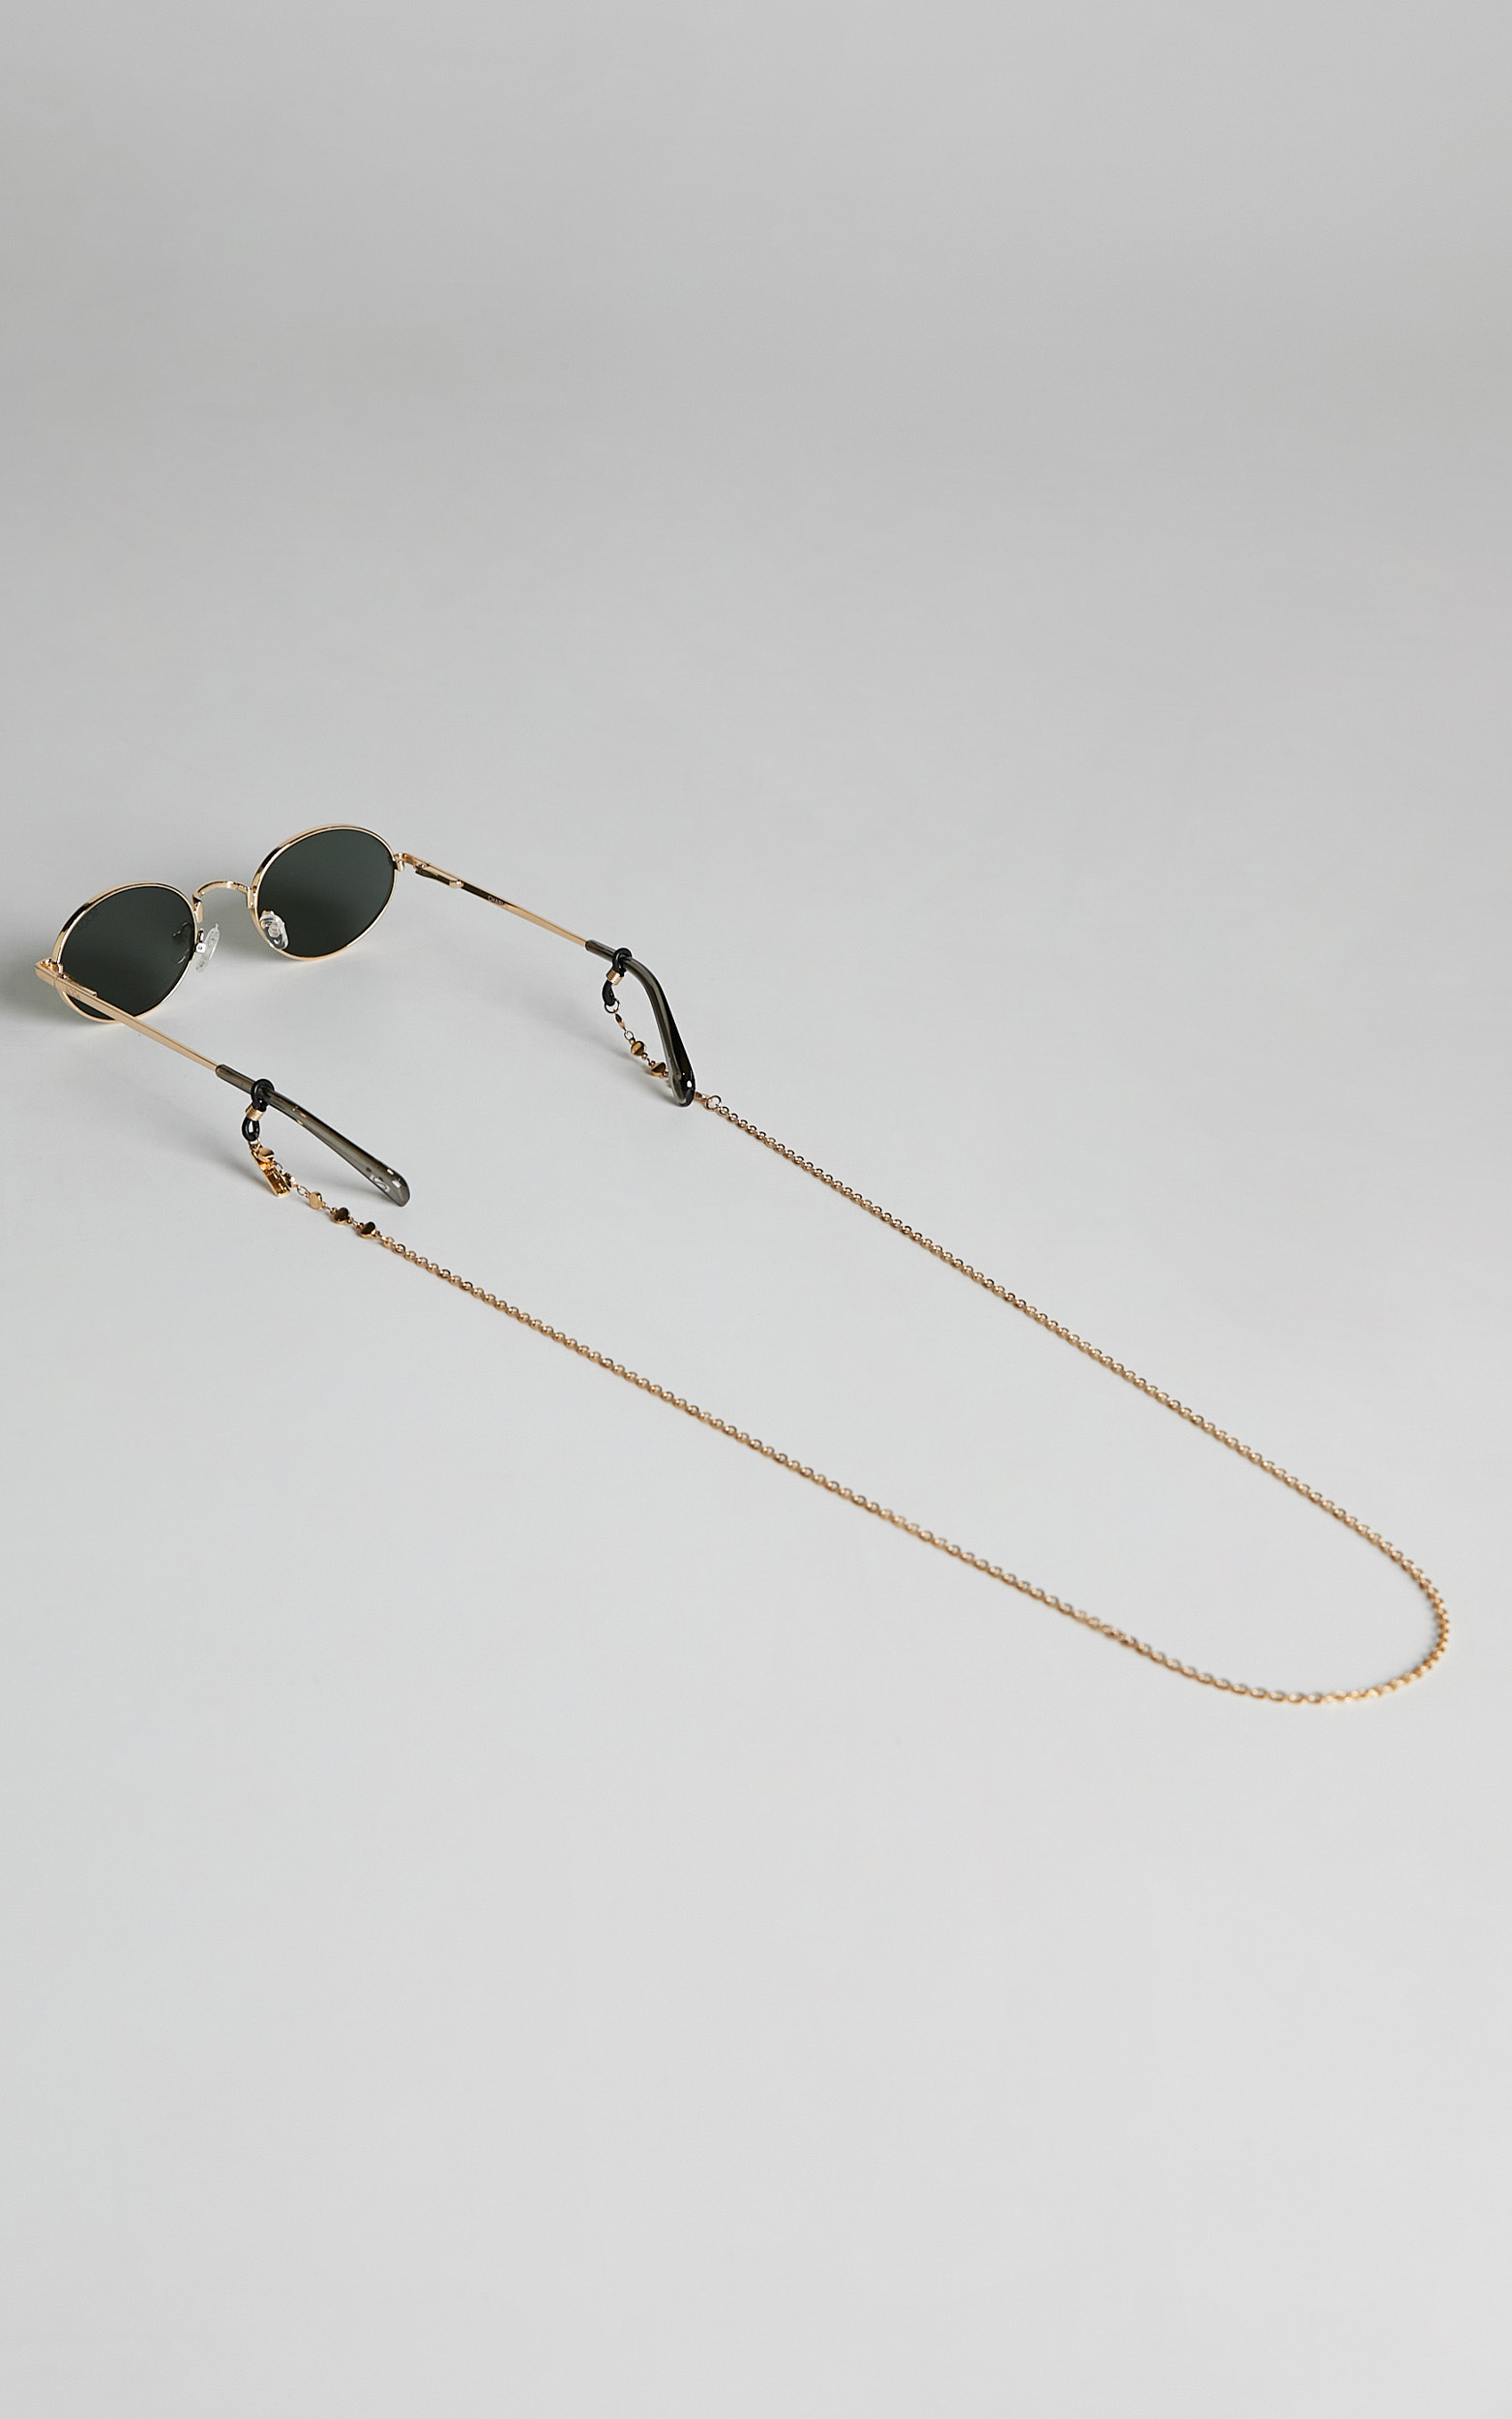 Soda Shades - Uno Sunglasses Chain in Gold - NoSize, GLD1, hi-res image number null